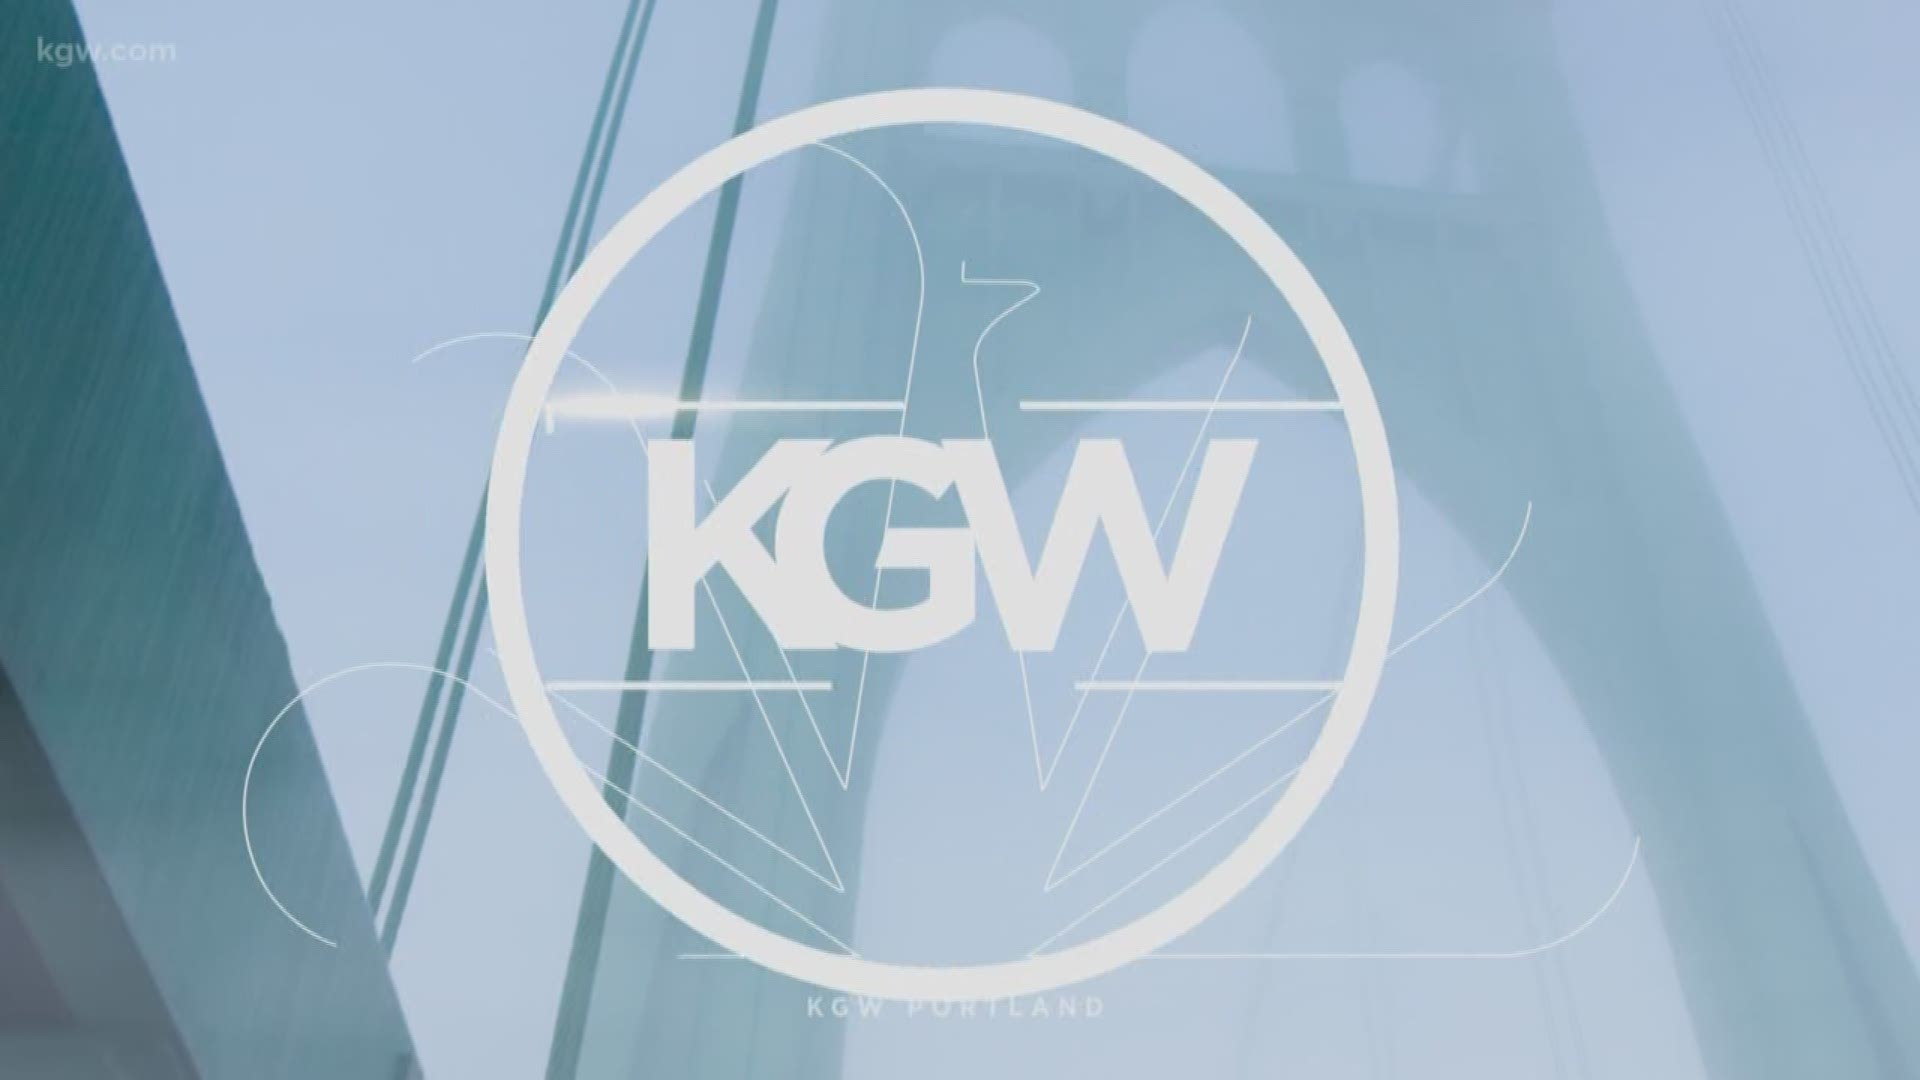 KGW News at Noon, the top stories of the daily newscast